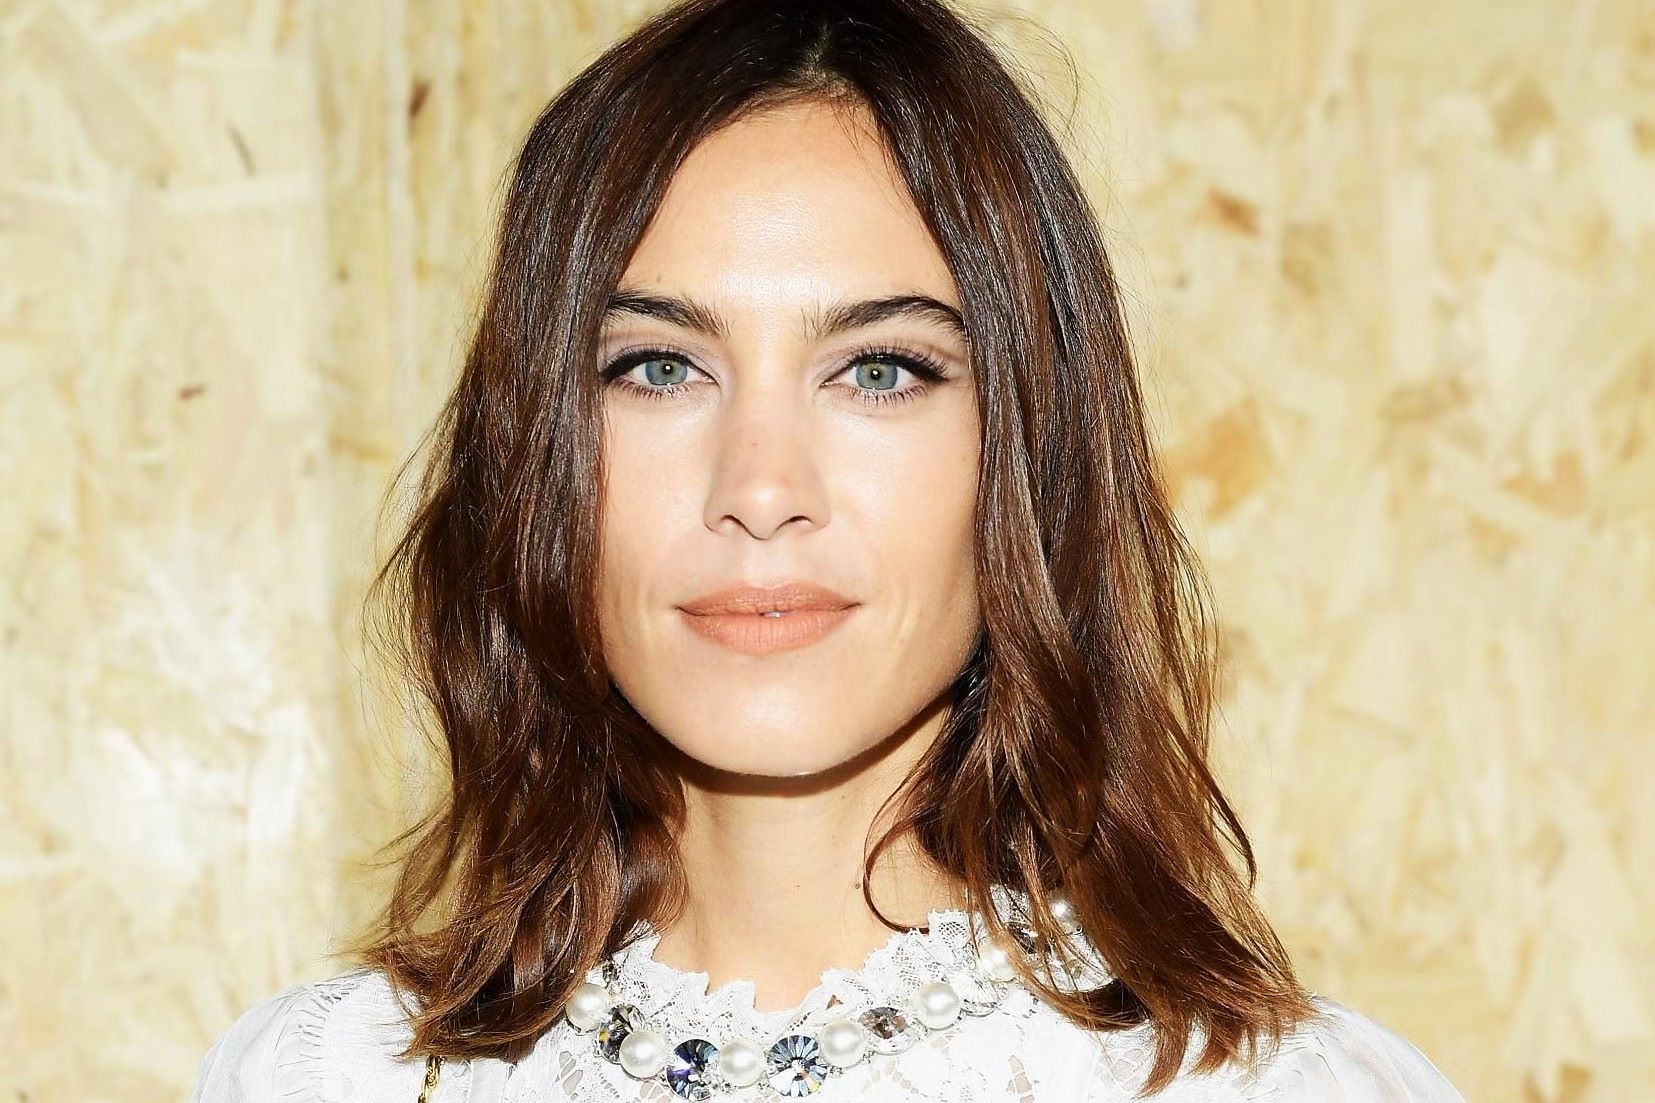 16 Surprising Facts About Alexa Chung - Facts.net